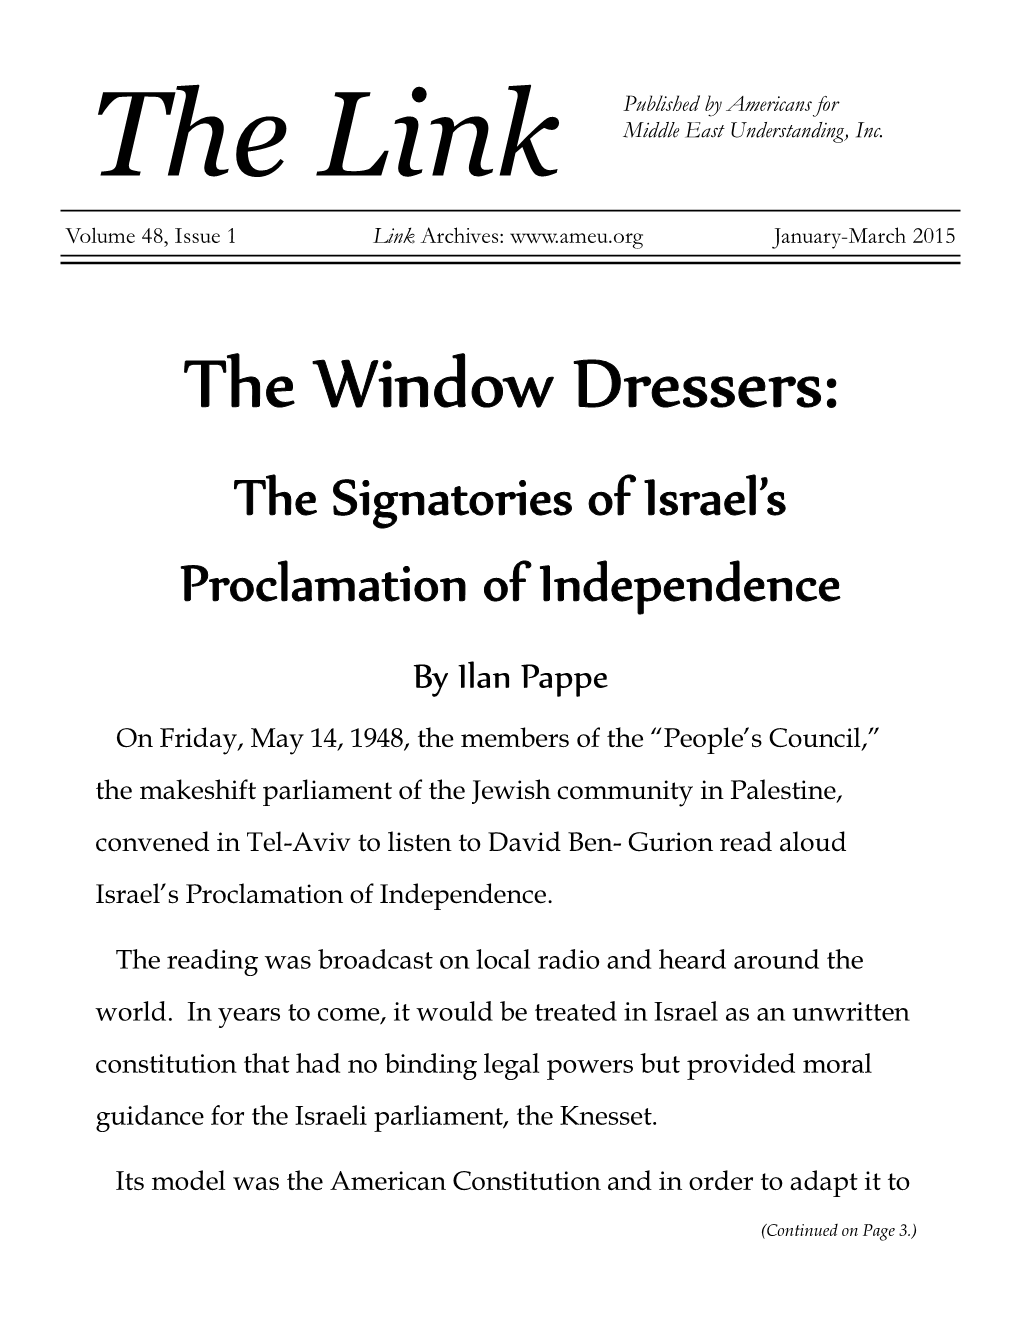 The Window Dressers: the Signatories of Israel's Proclamation